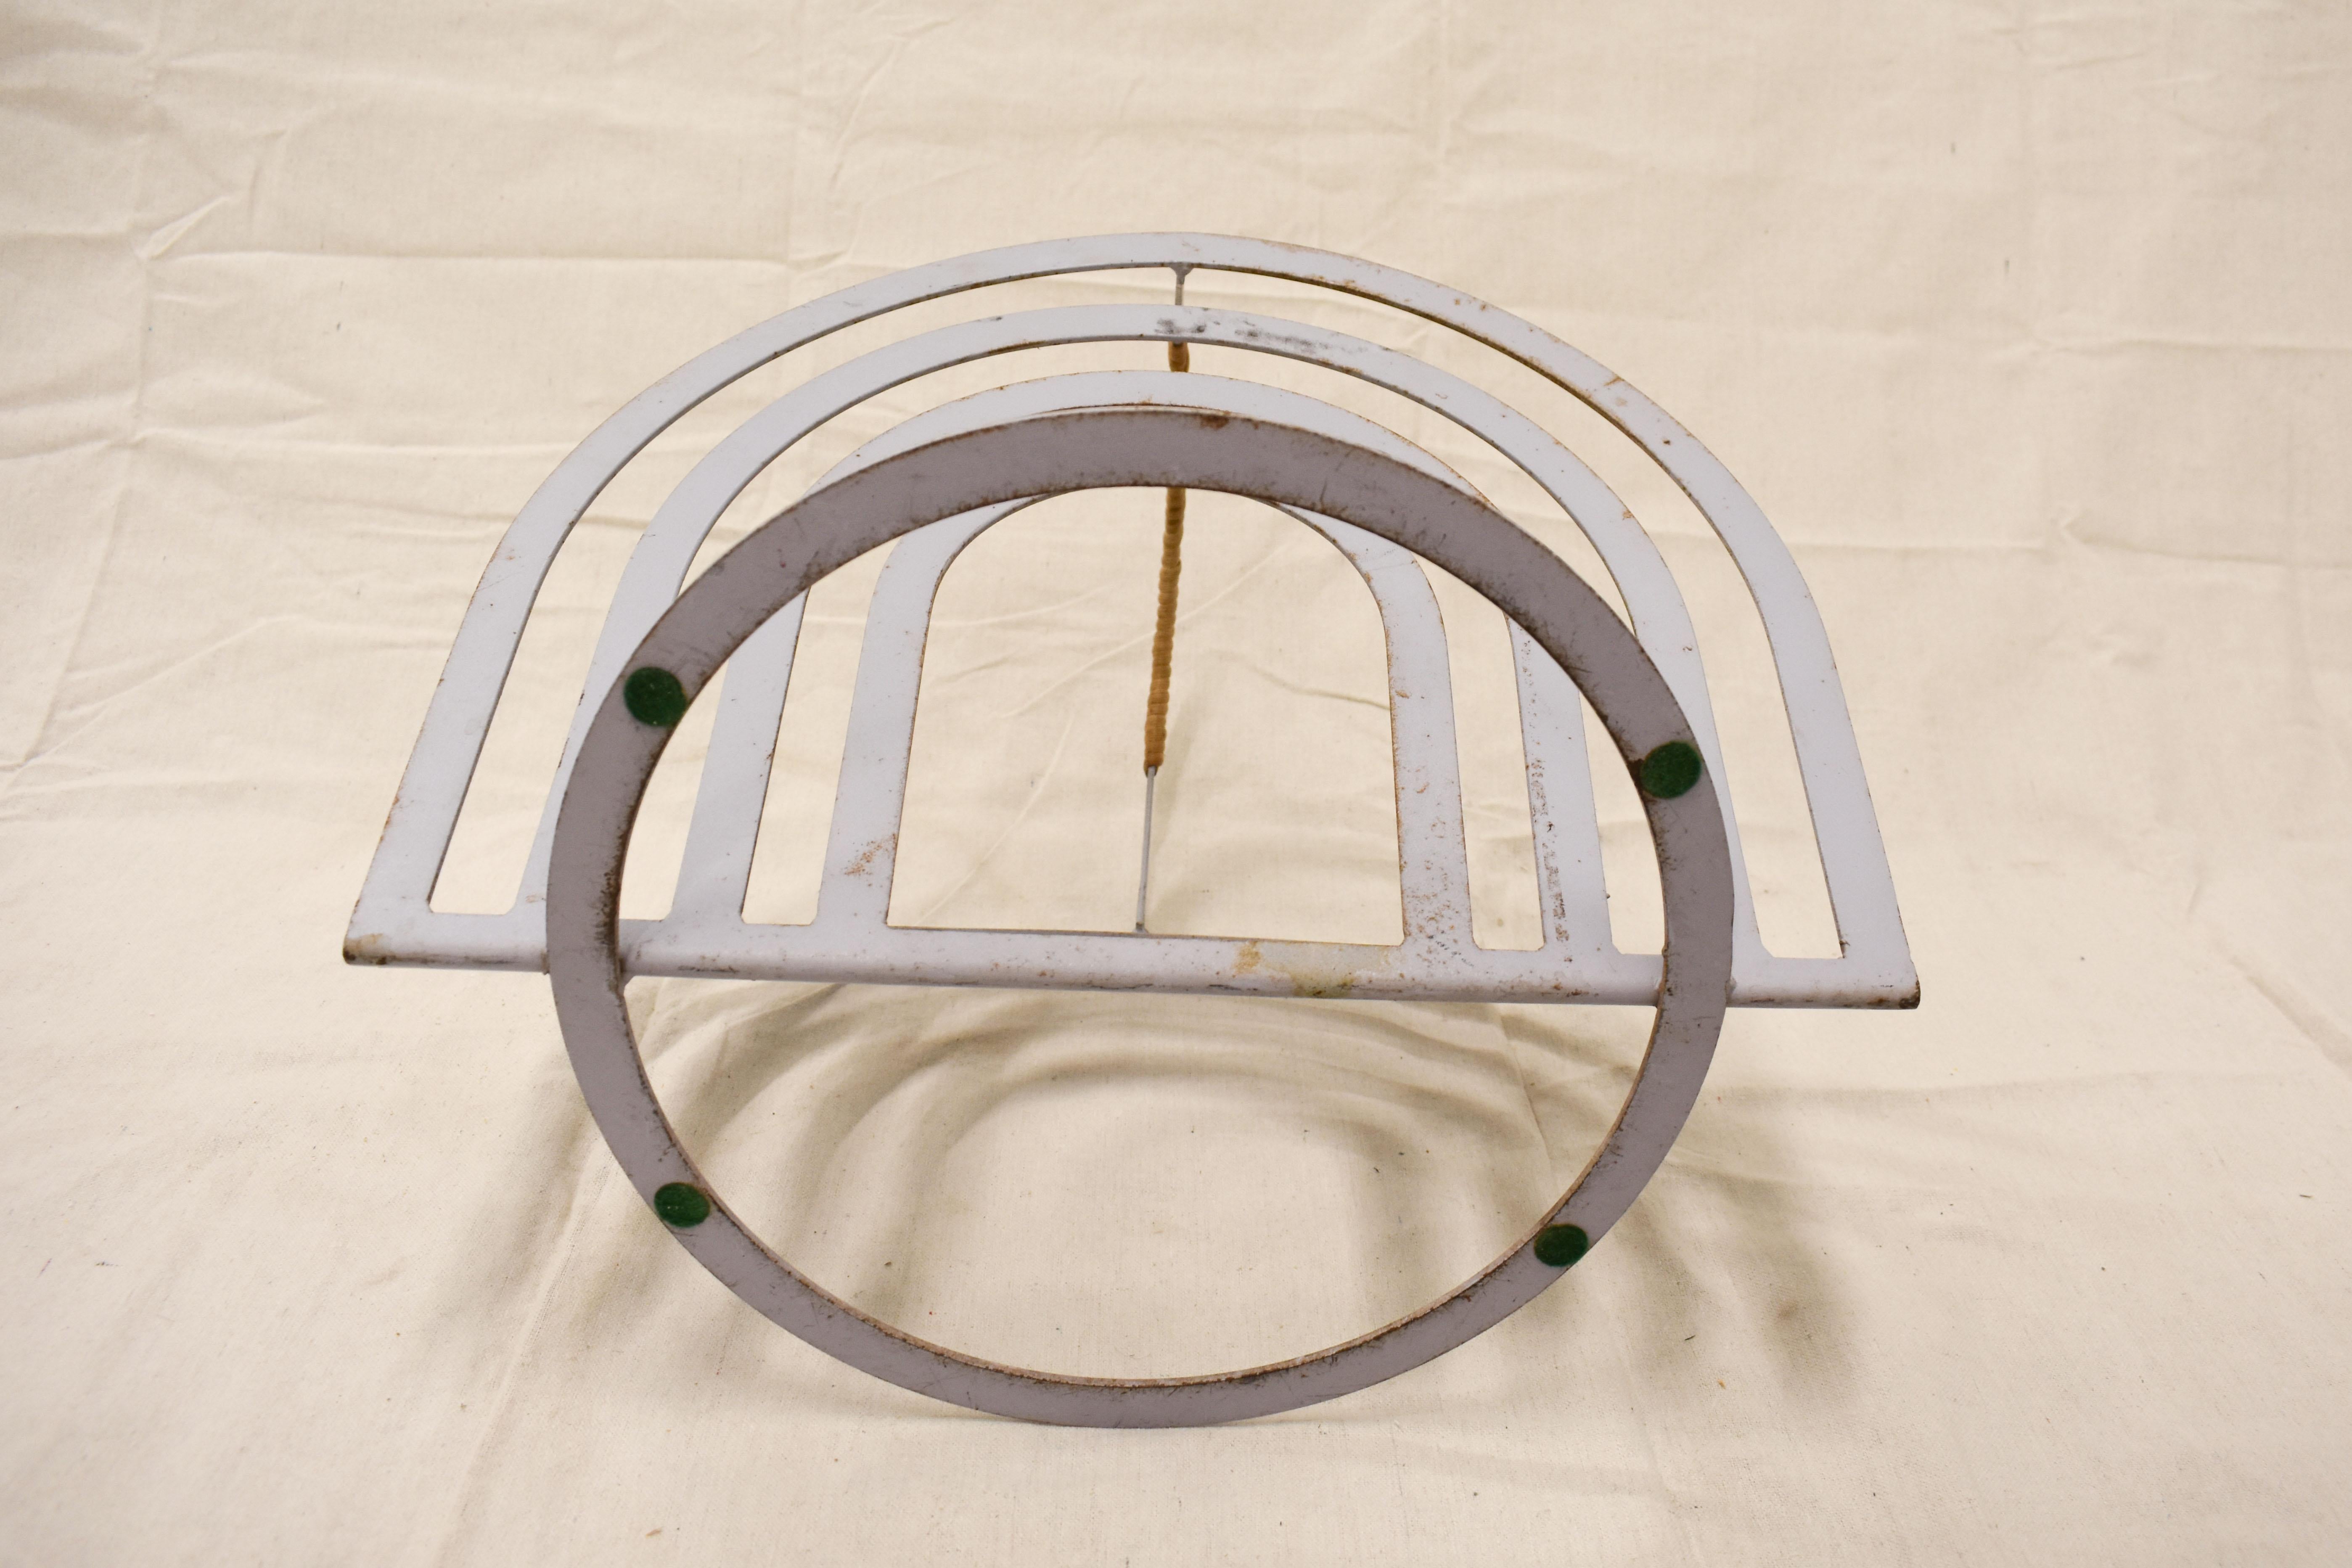 Umanoff Steel and Rattan Magazine Rack In Good Condition For Sale In Tucson, AZ